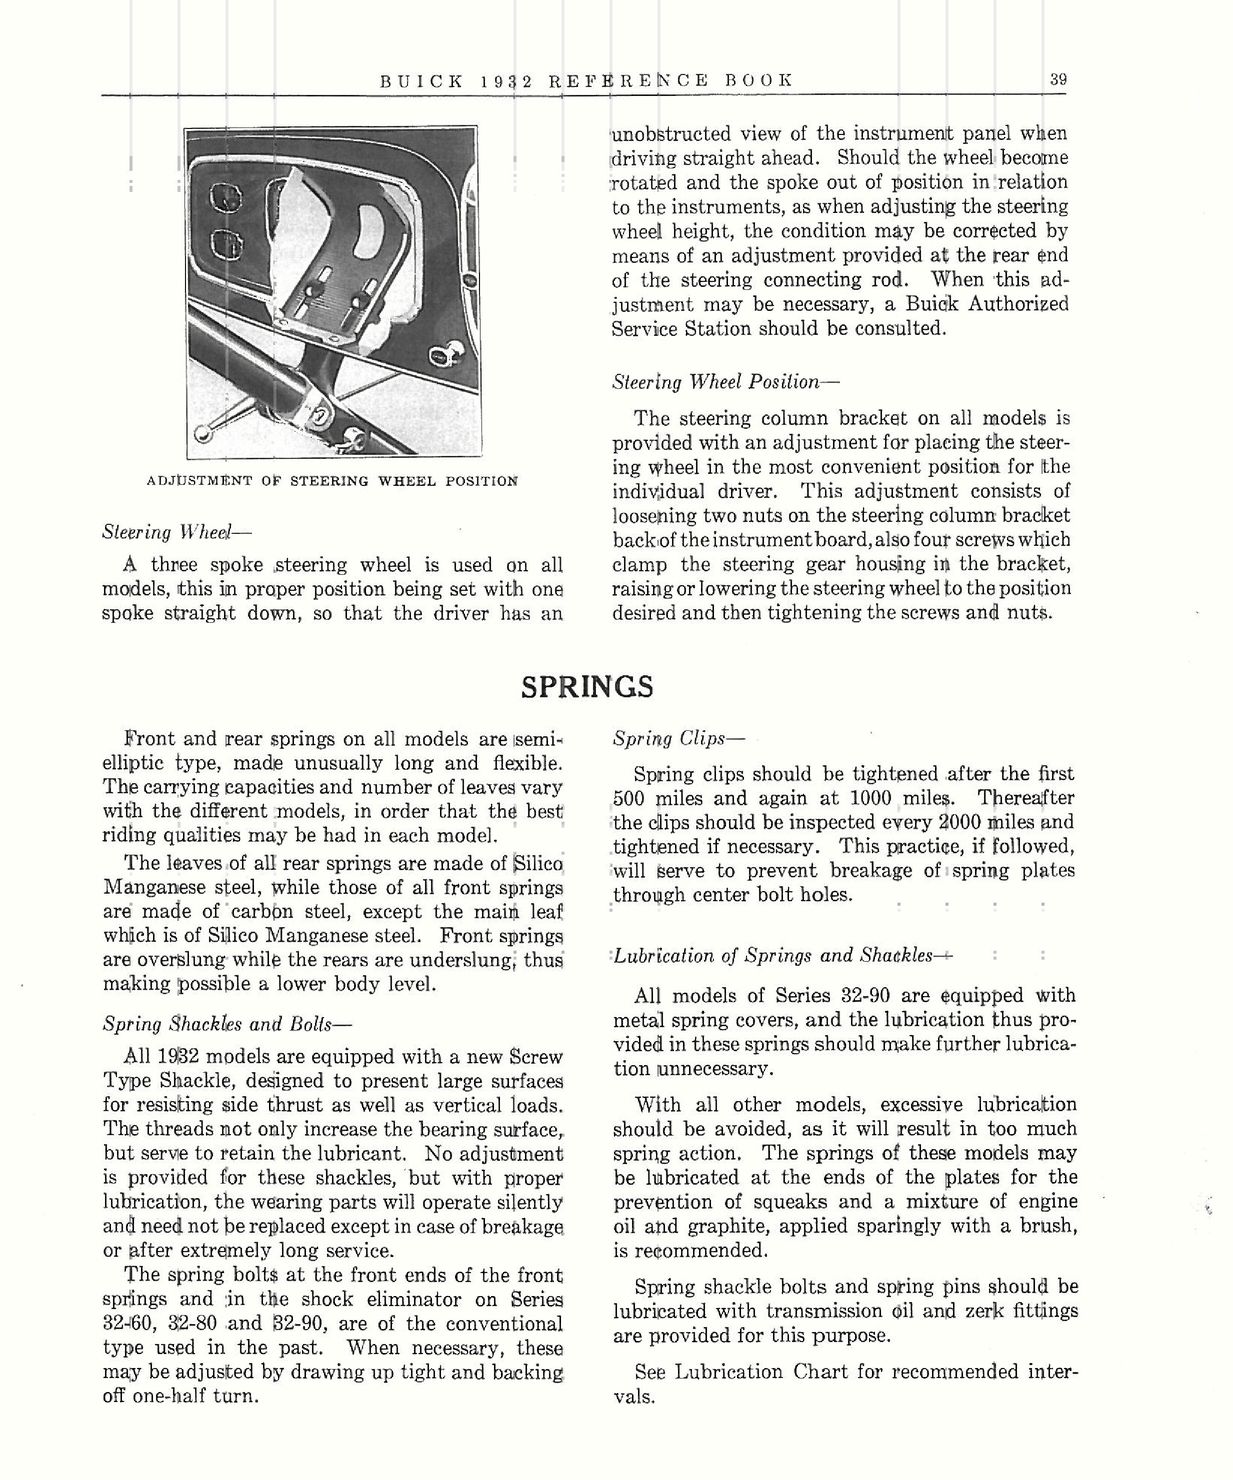 n_1932 Buick Reference Book-39.jpg